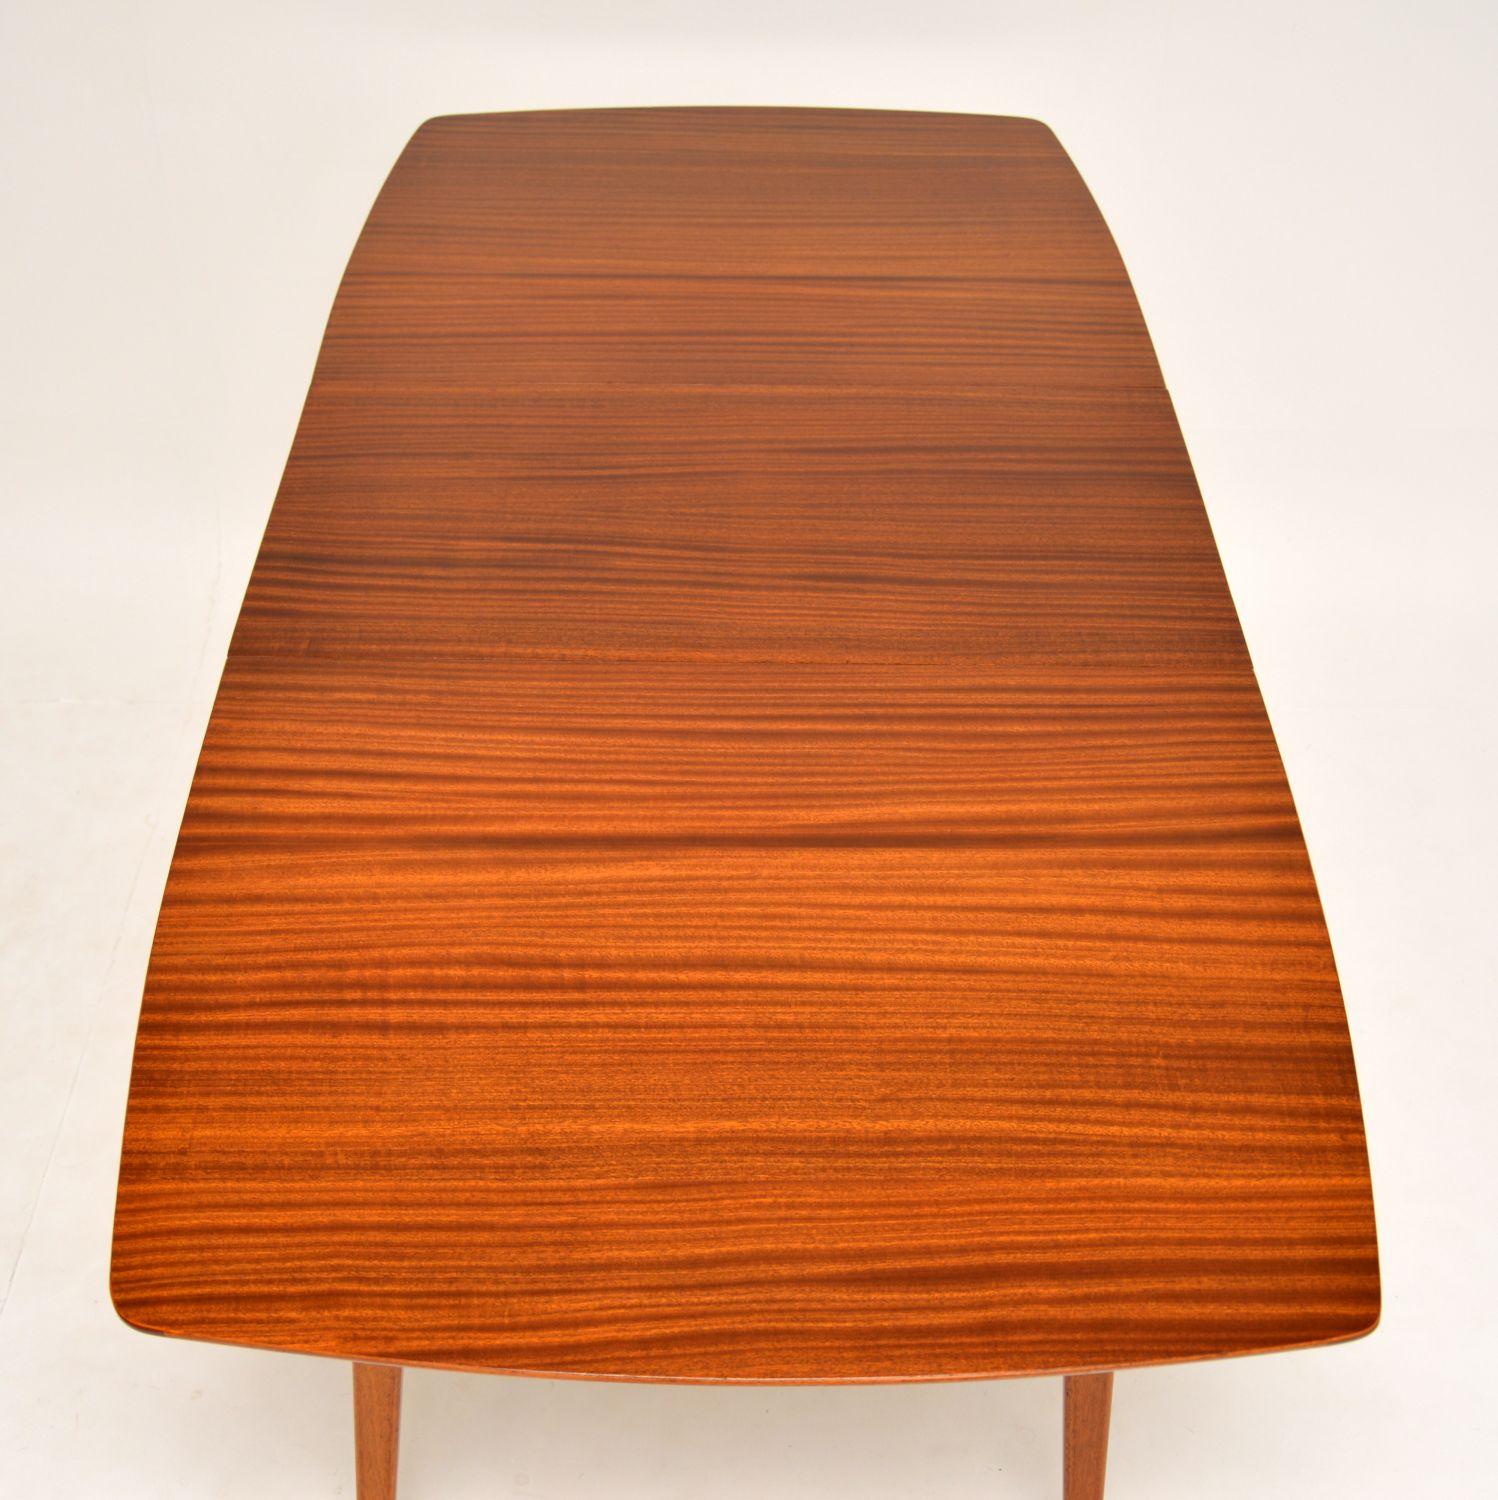 1950s Vintage Mahogany Dining Table by Peter Hayward for Vanson 1